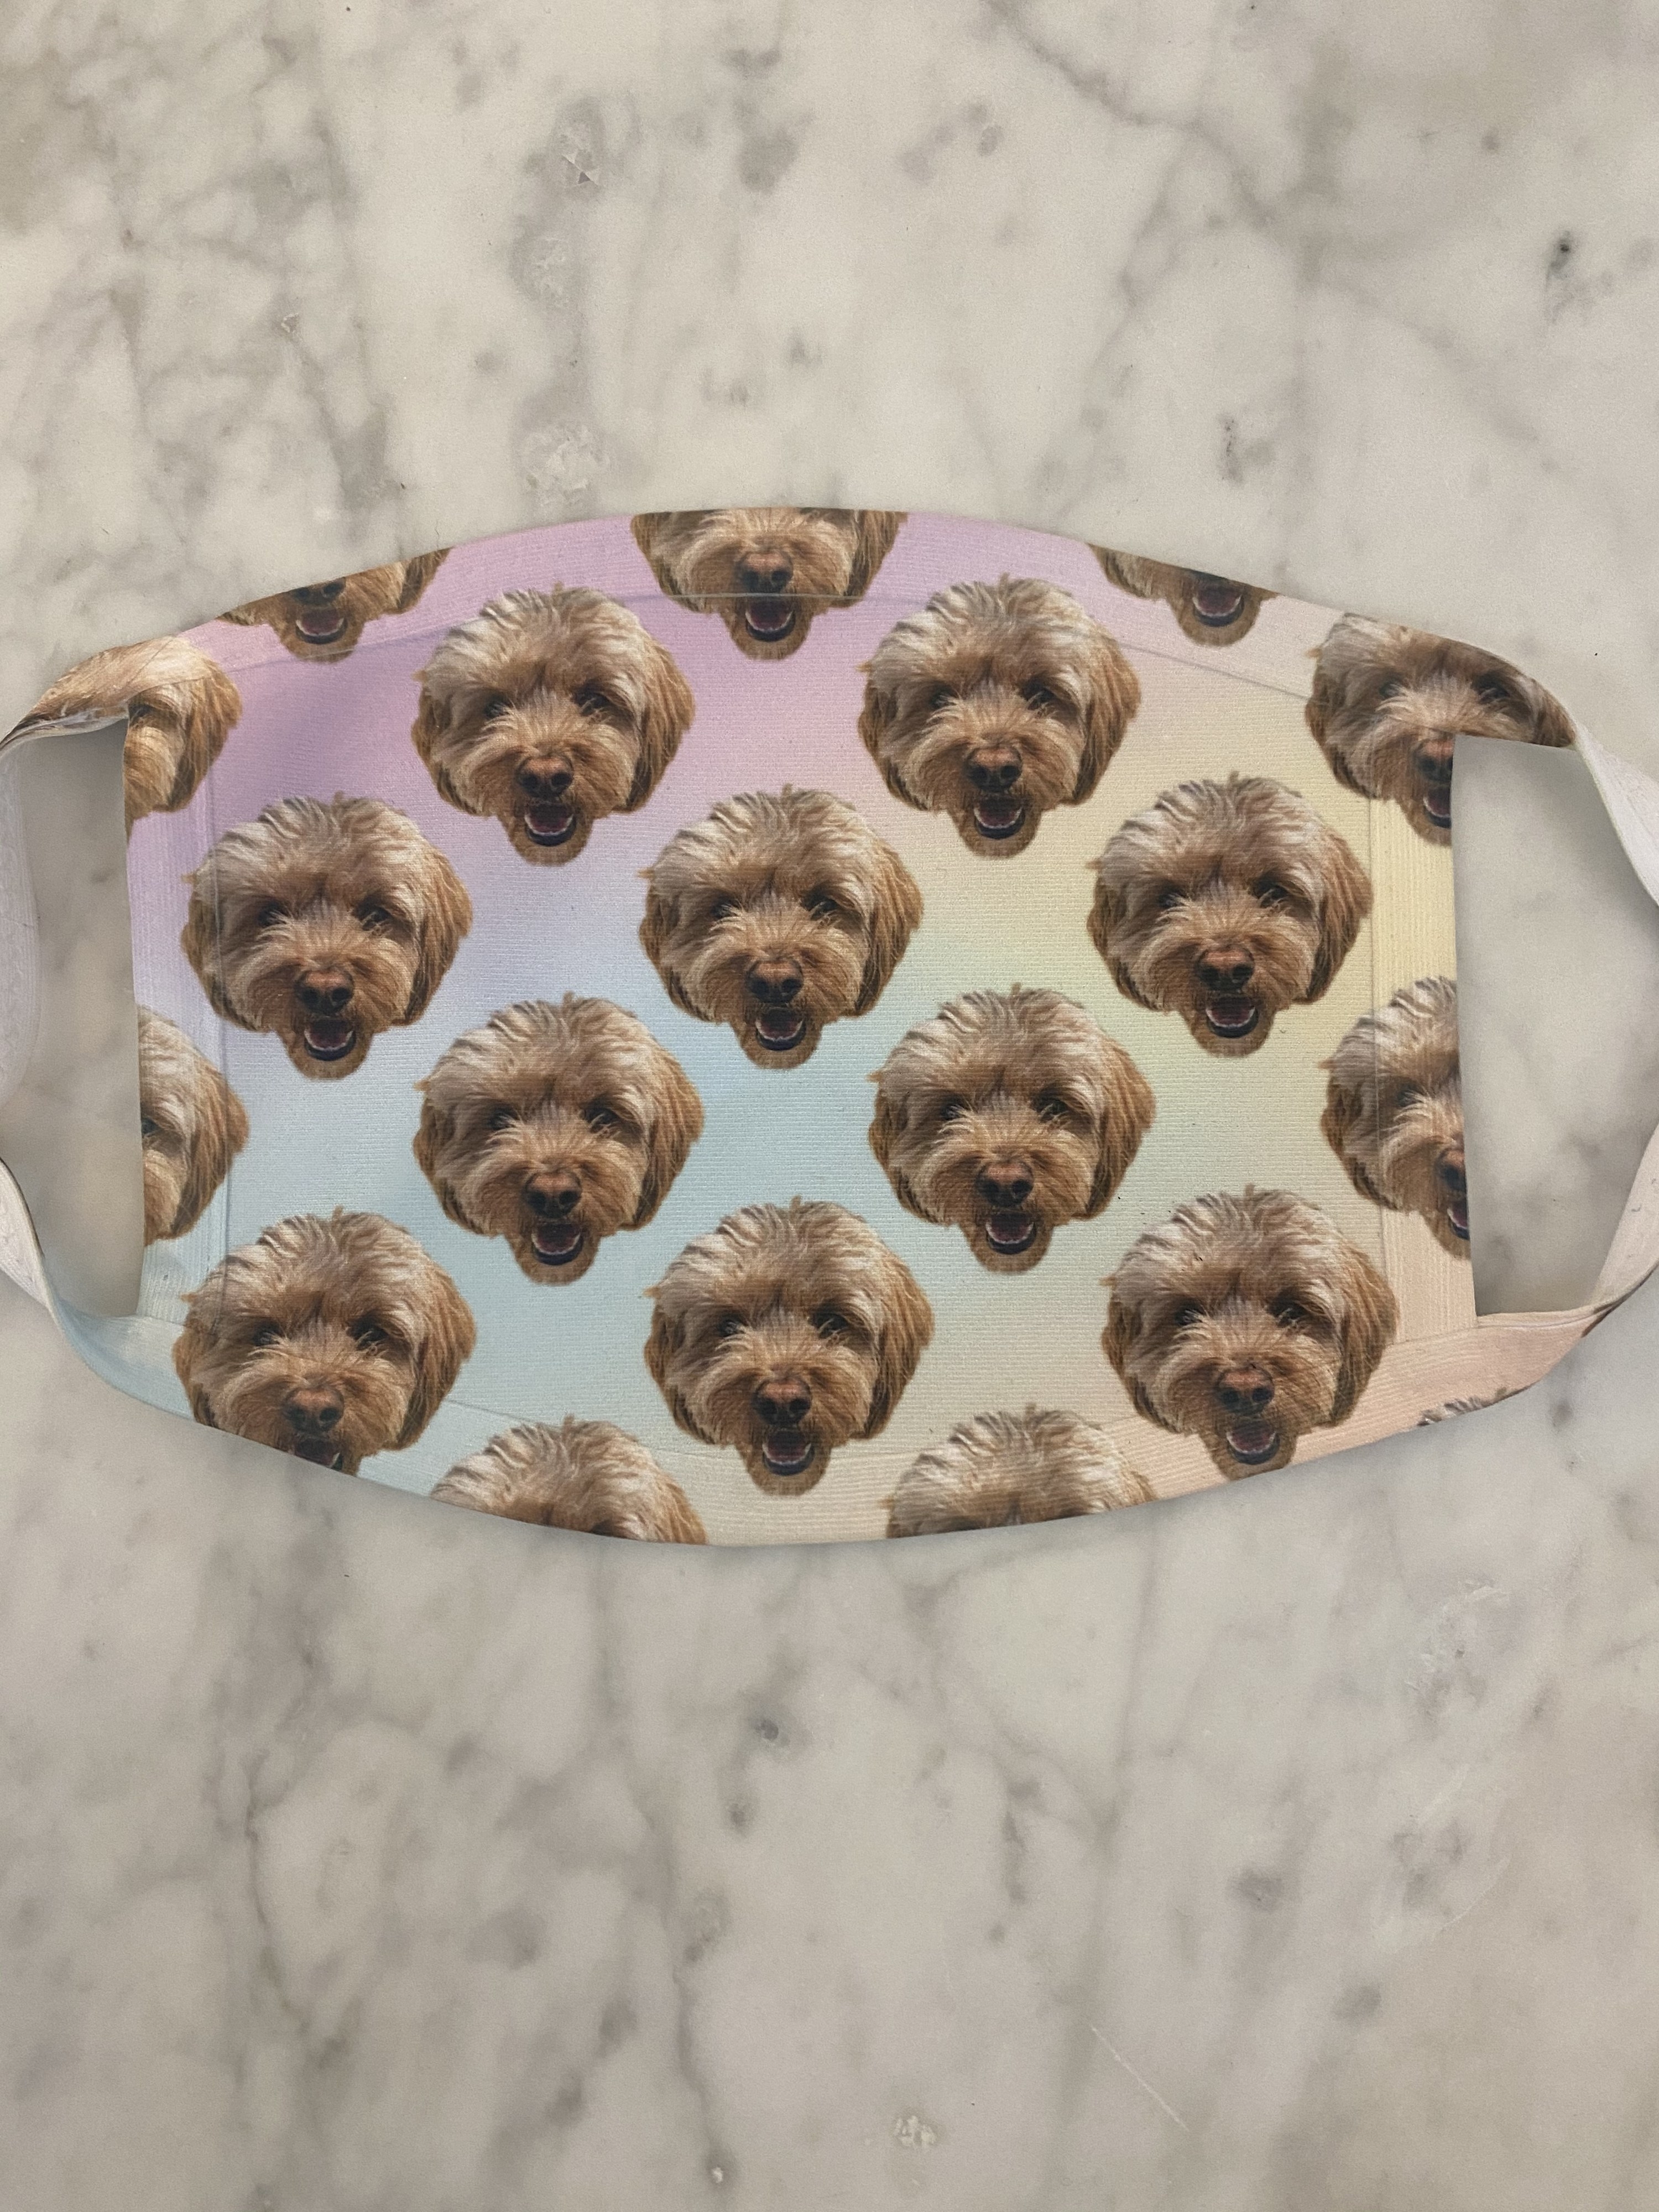 You Can Get A Face Mask With Your Pets Face On It image